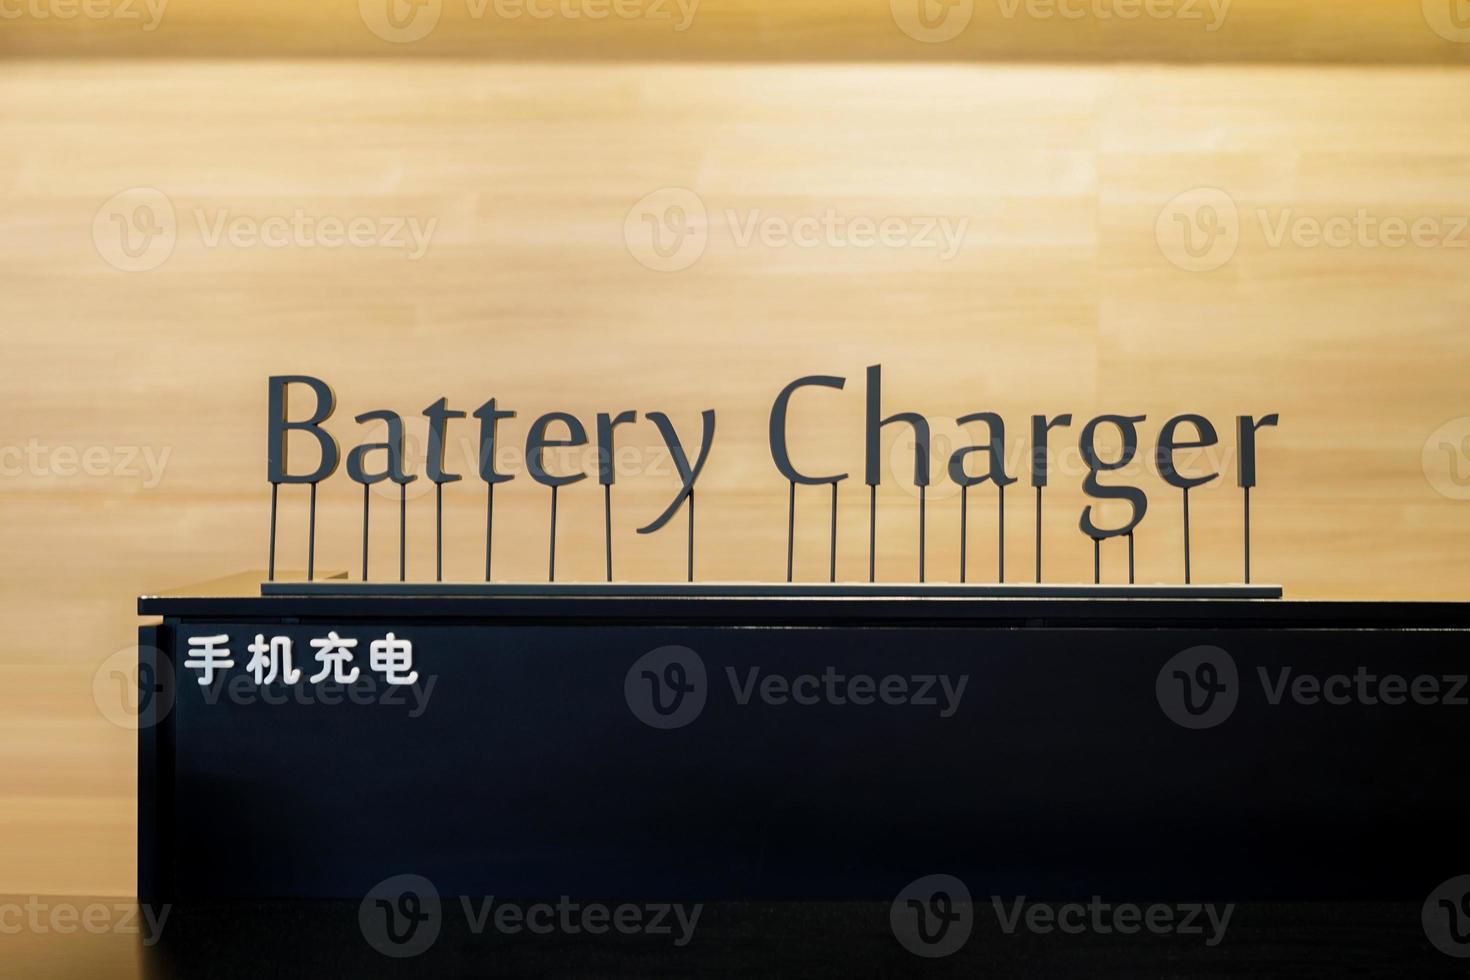 Battery Charger Art Letter pop-up sign on the black counter with Chinese Language. Chinese Laguage in picture mean battery charger. photo